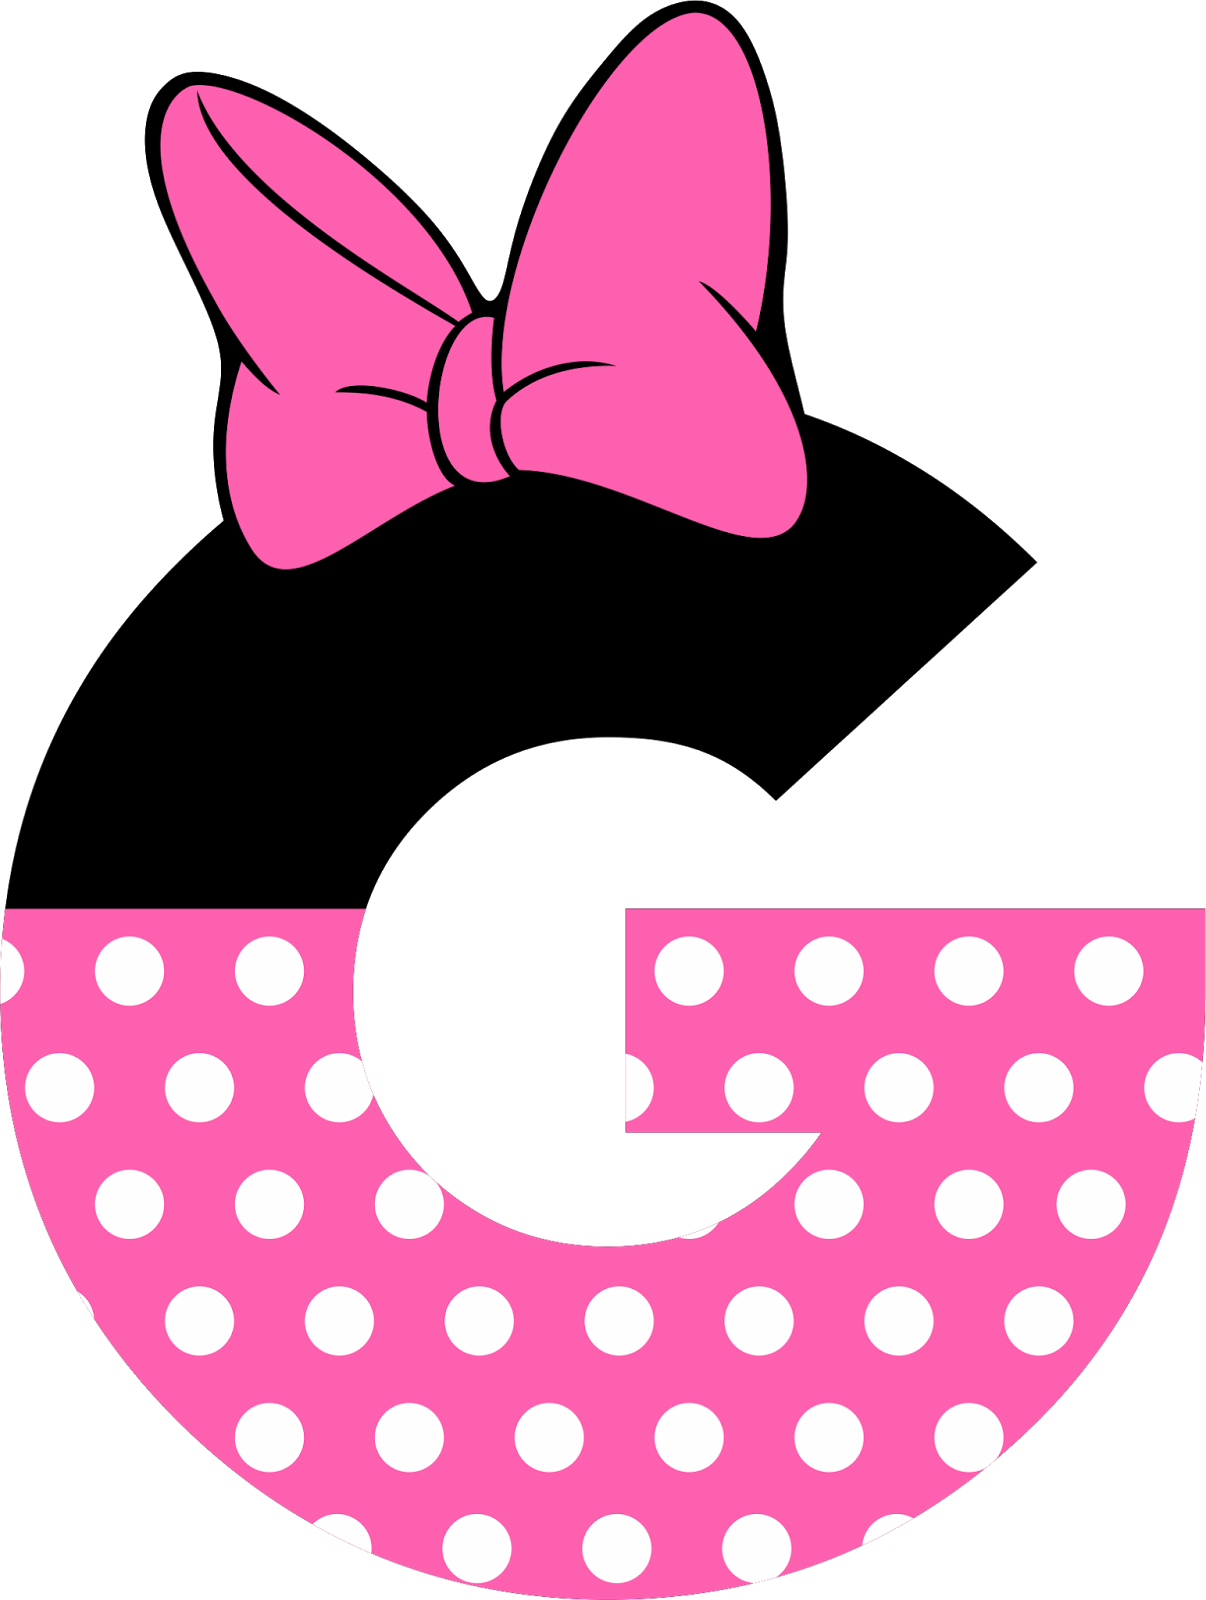 A Pink And White Polka Dot Letter With A Bow